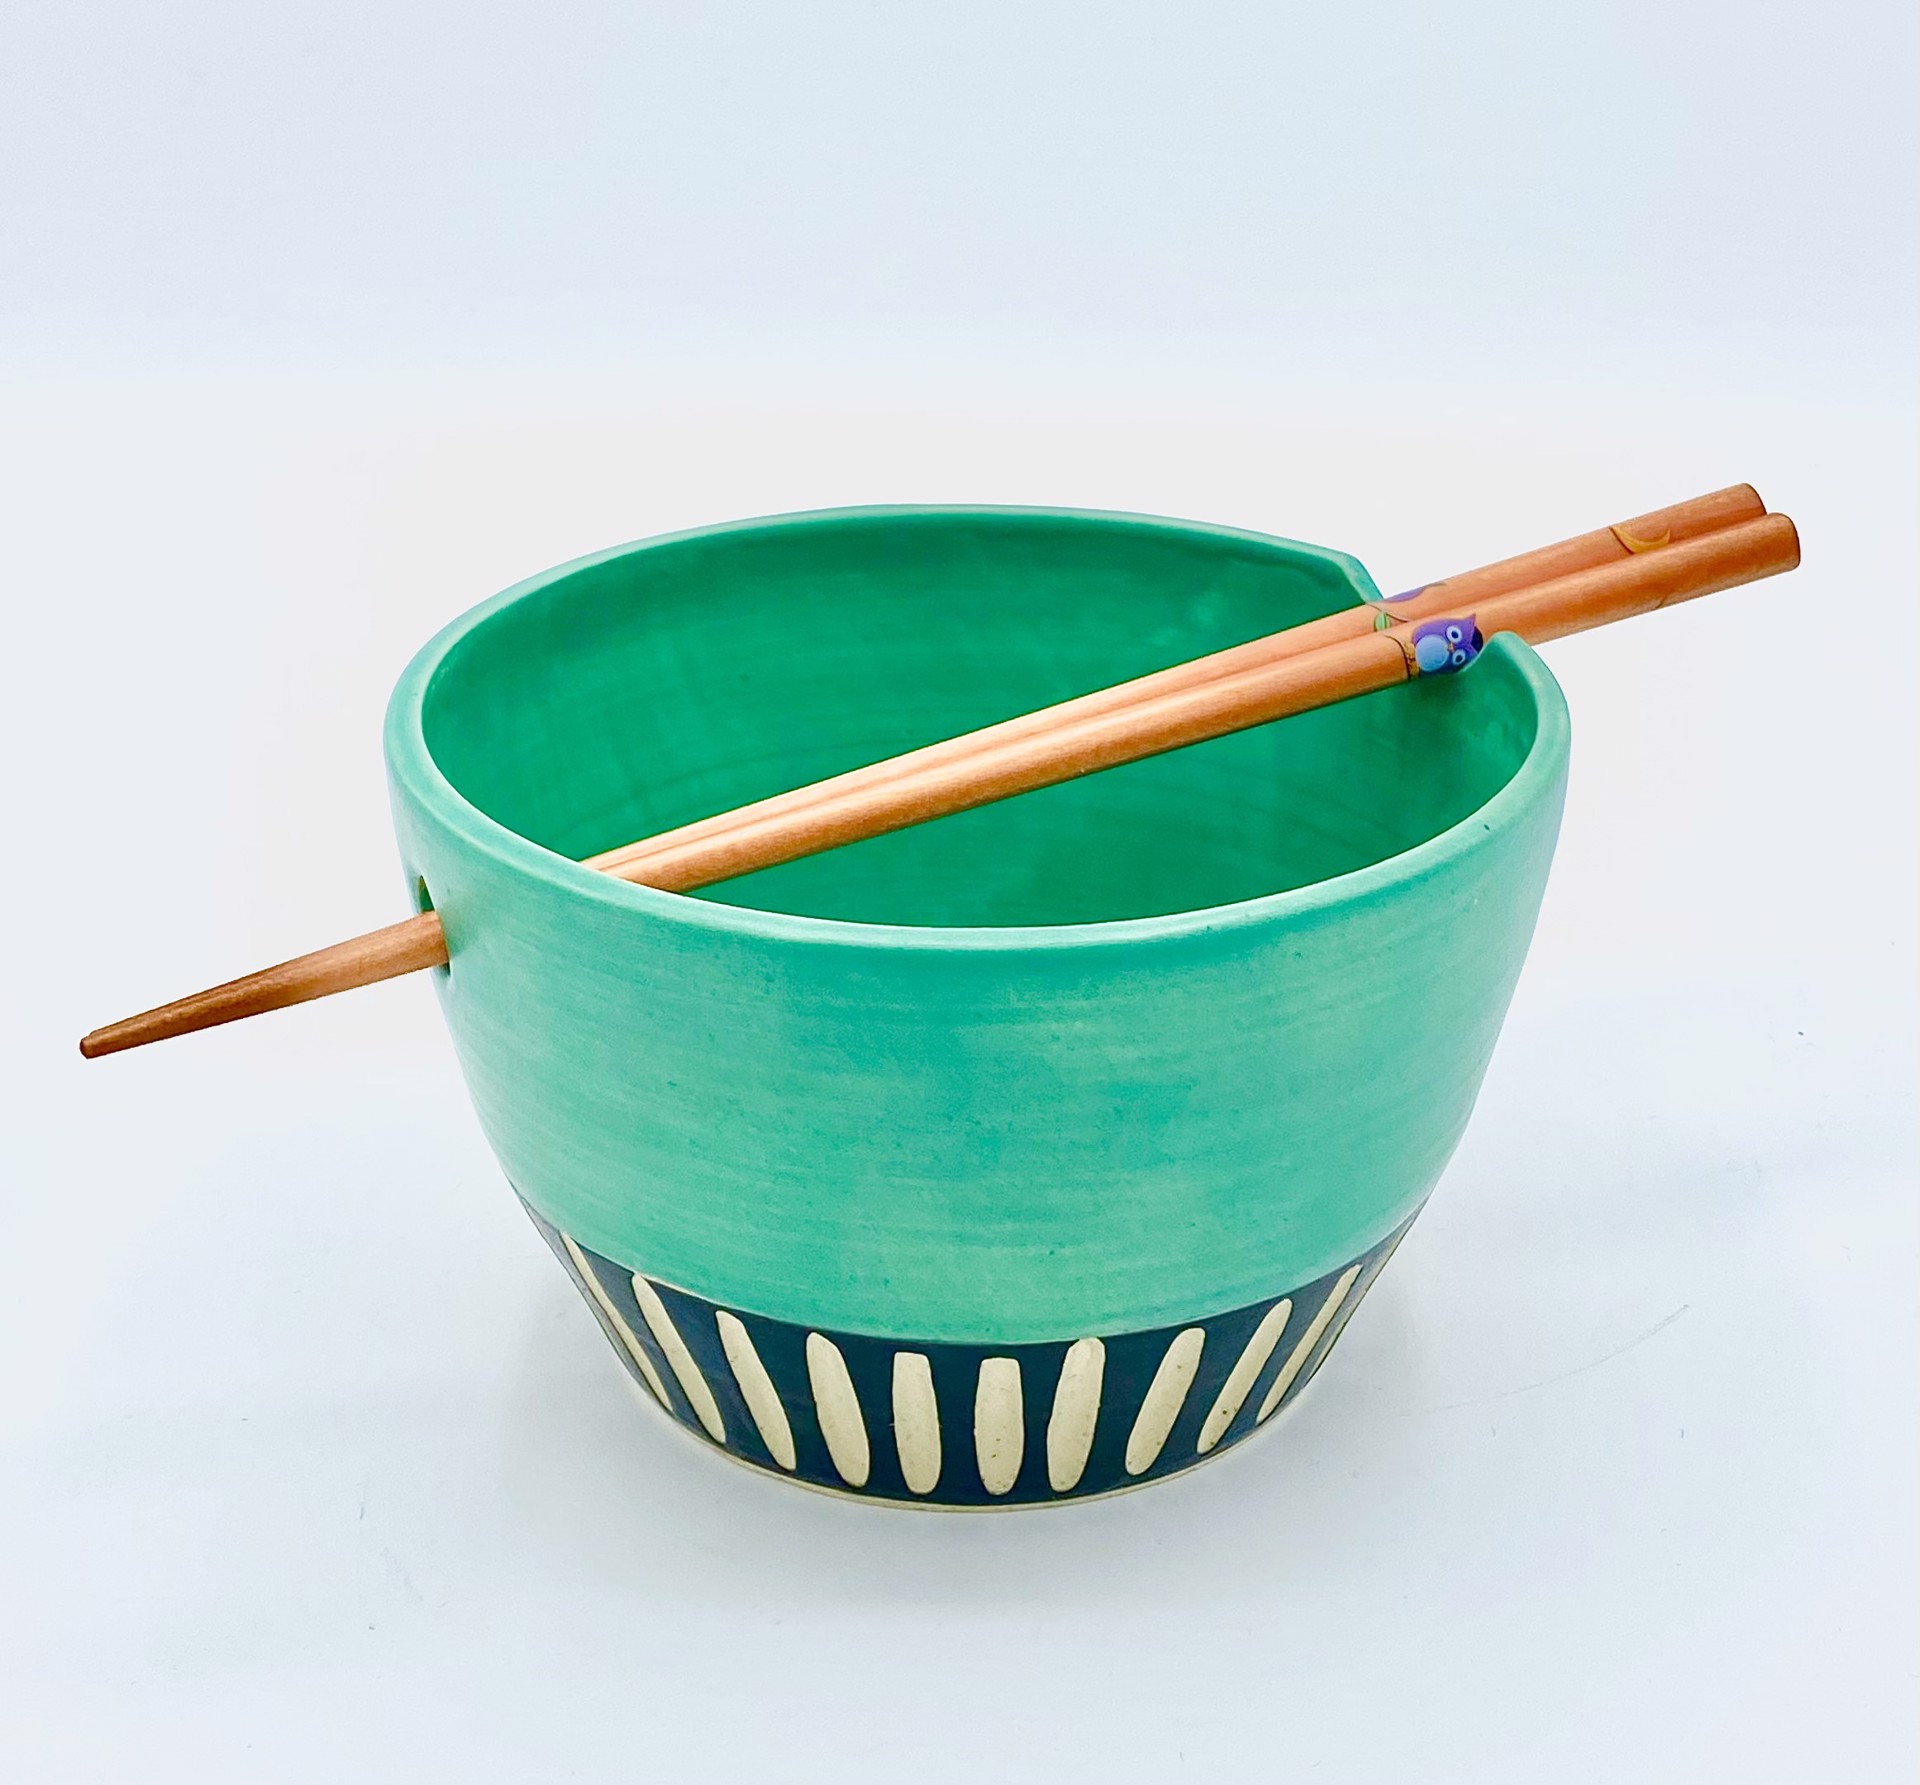 Medium Teal and Black Noodle Bowl by Messy Pots Pottery